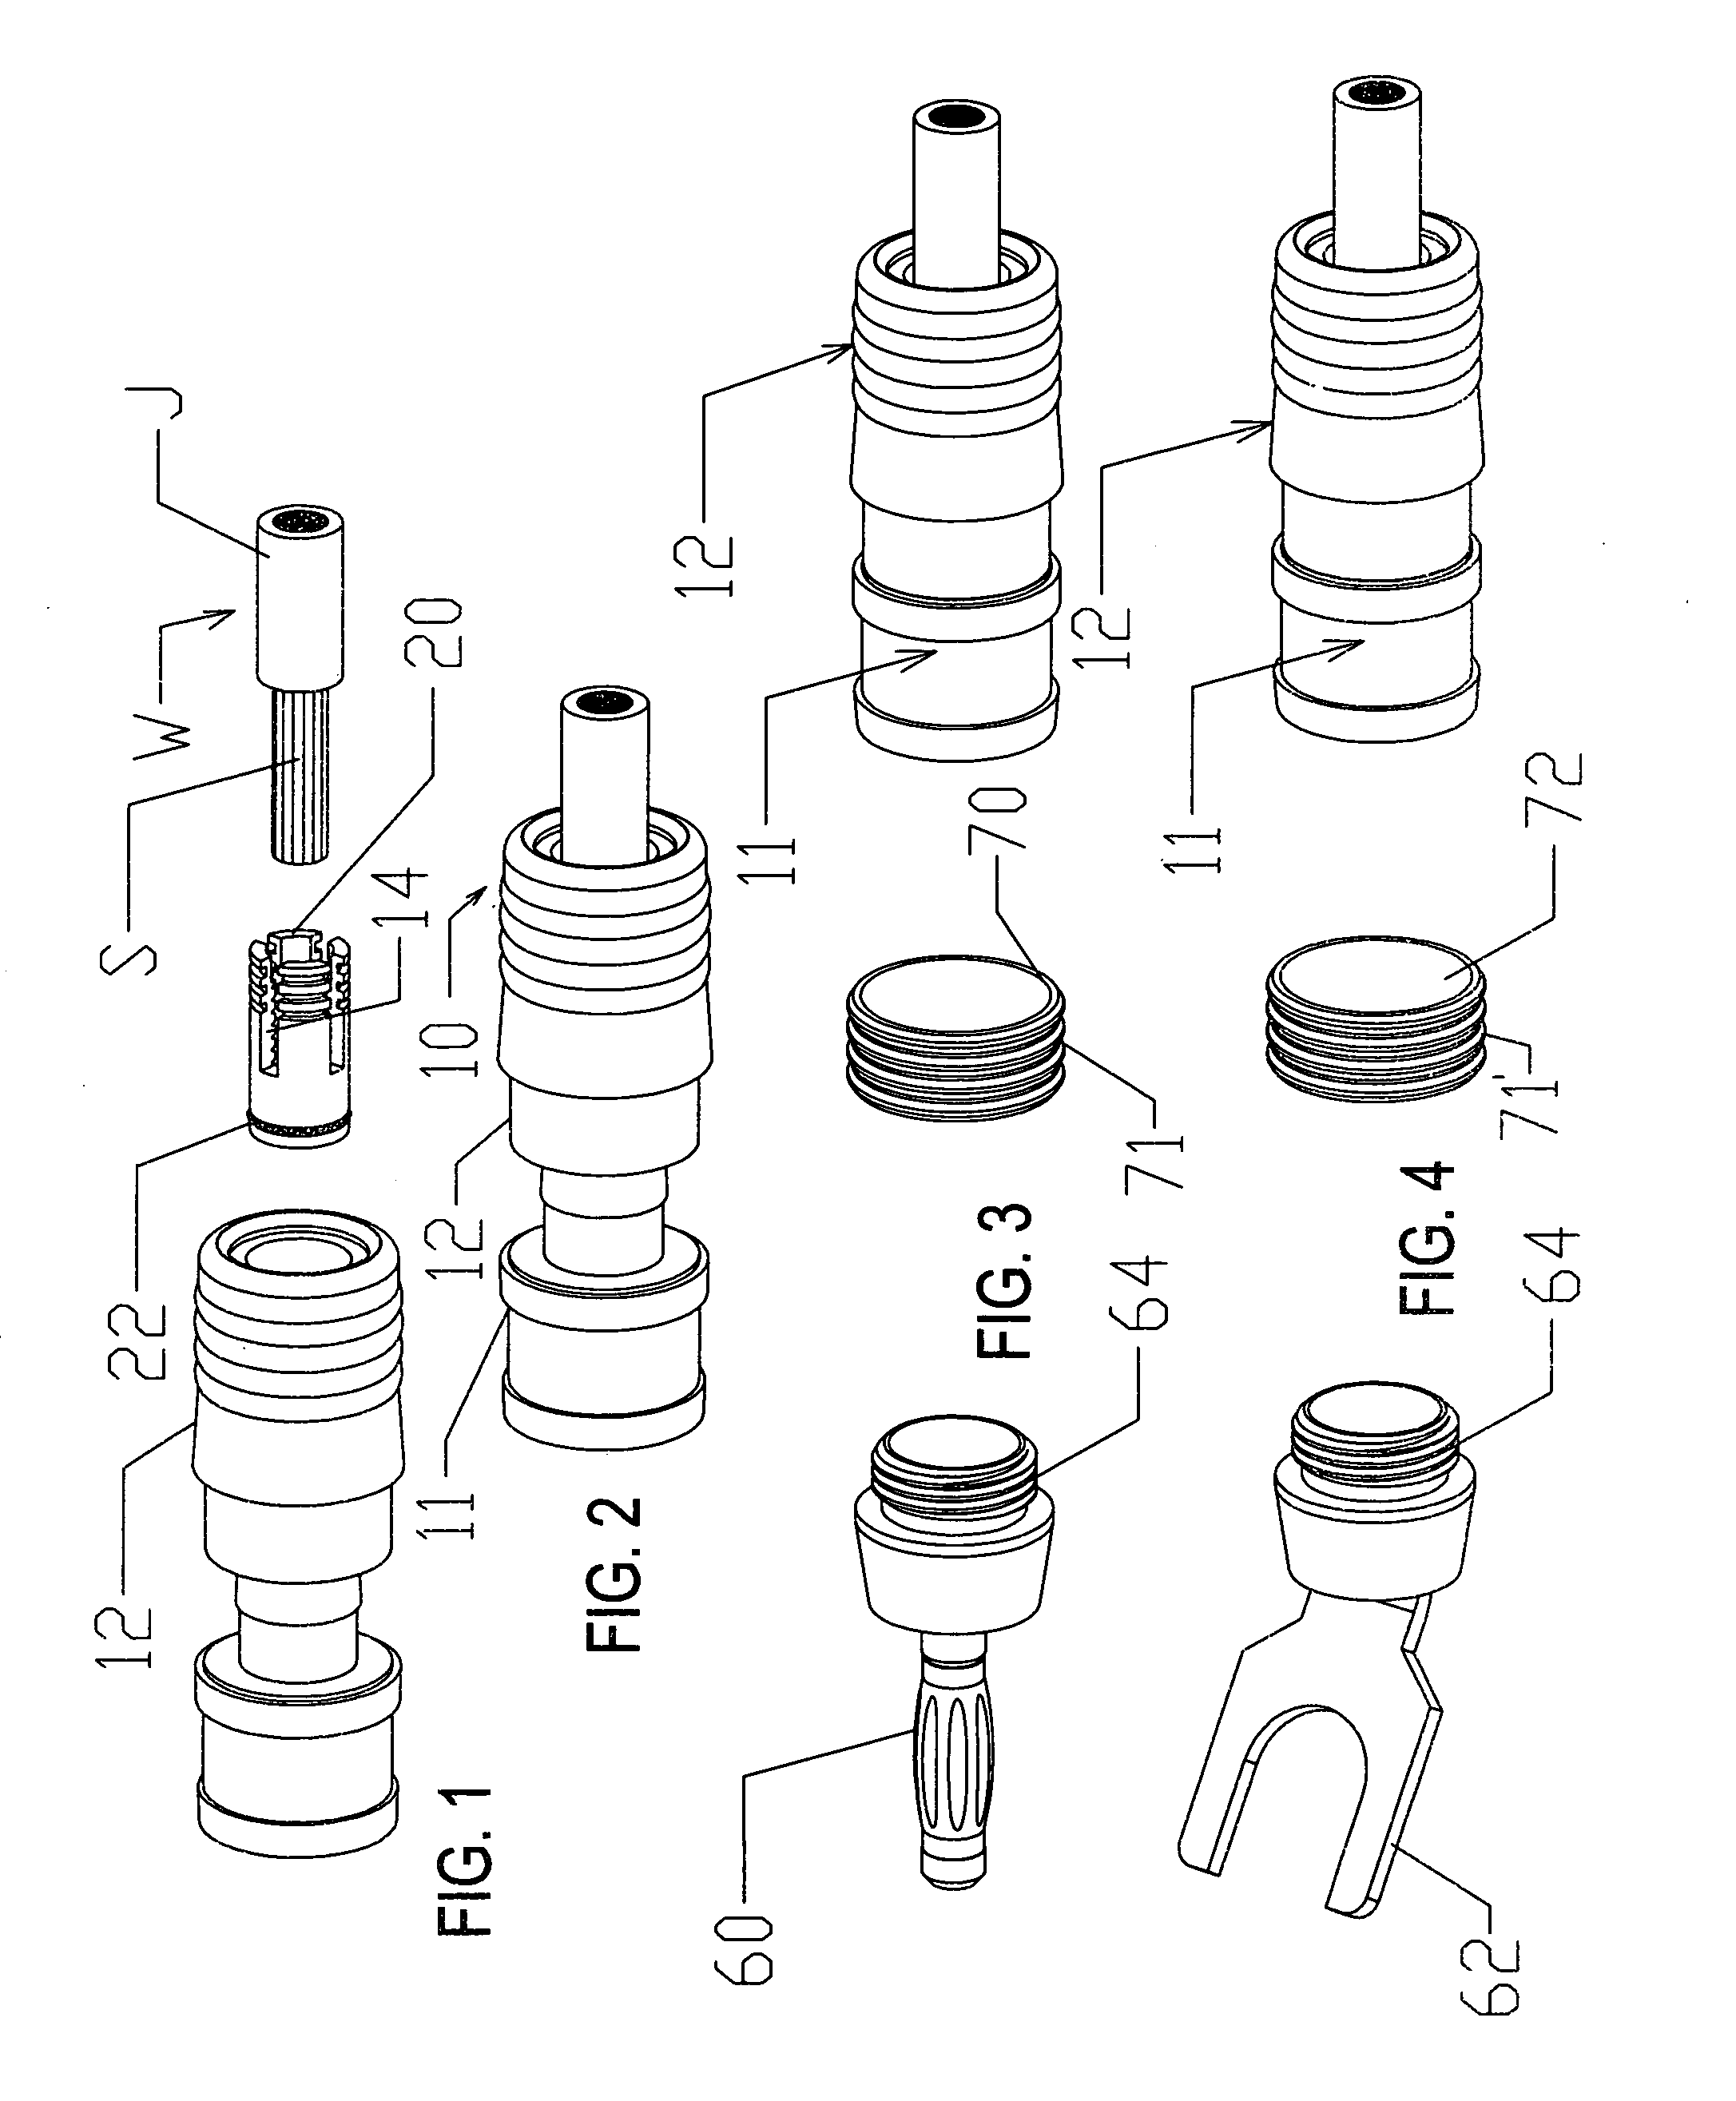 Crimpable wire connector assembly